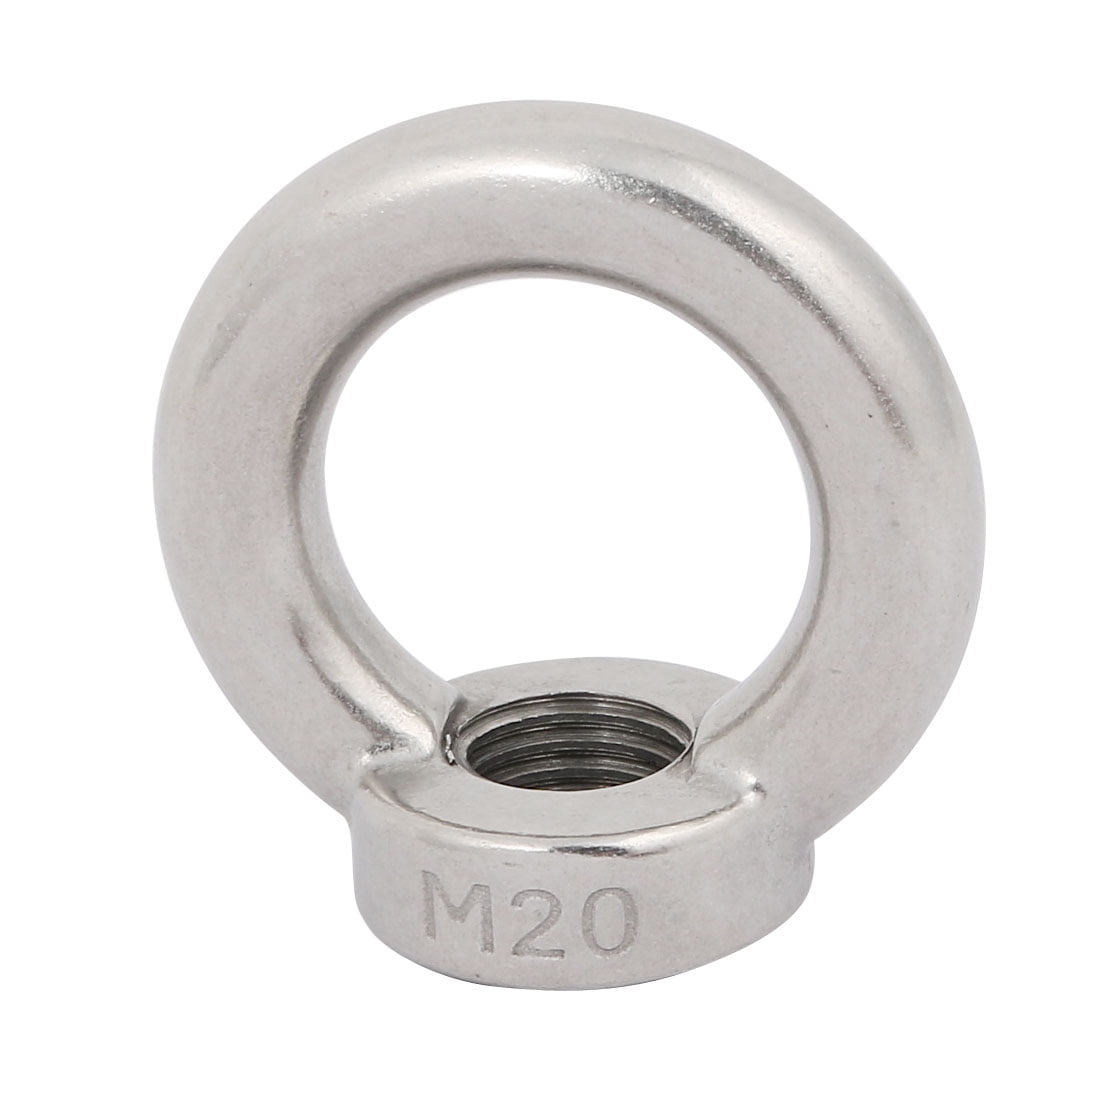 MTMTOOL M8 Stainless Steel Ring Lifting Eye Bolts Threaded Nuts Pack of 8